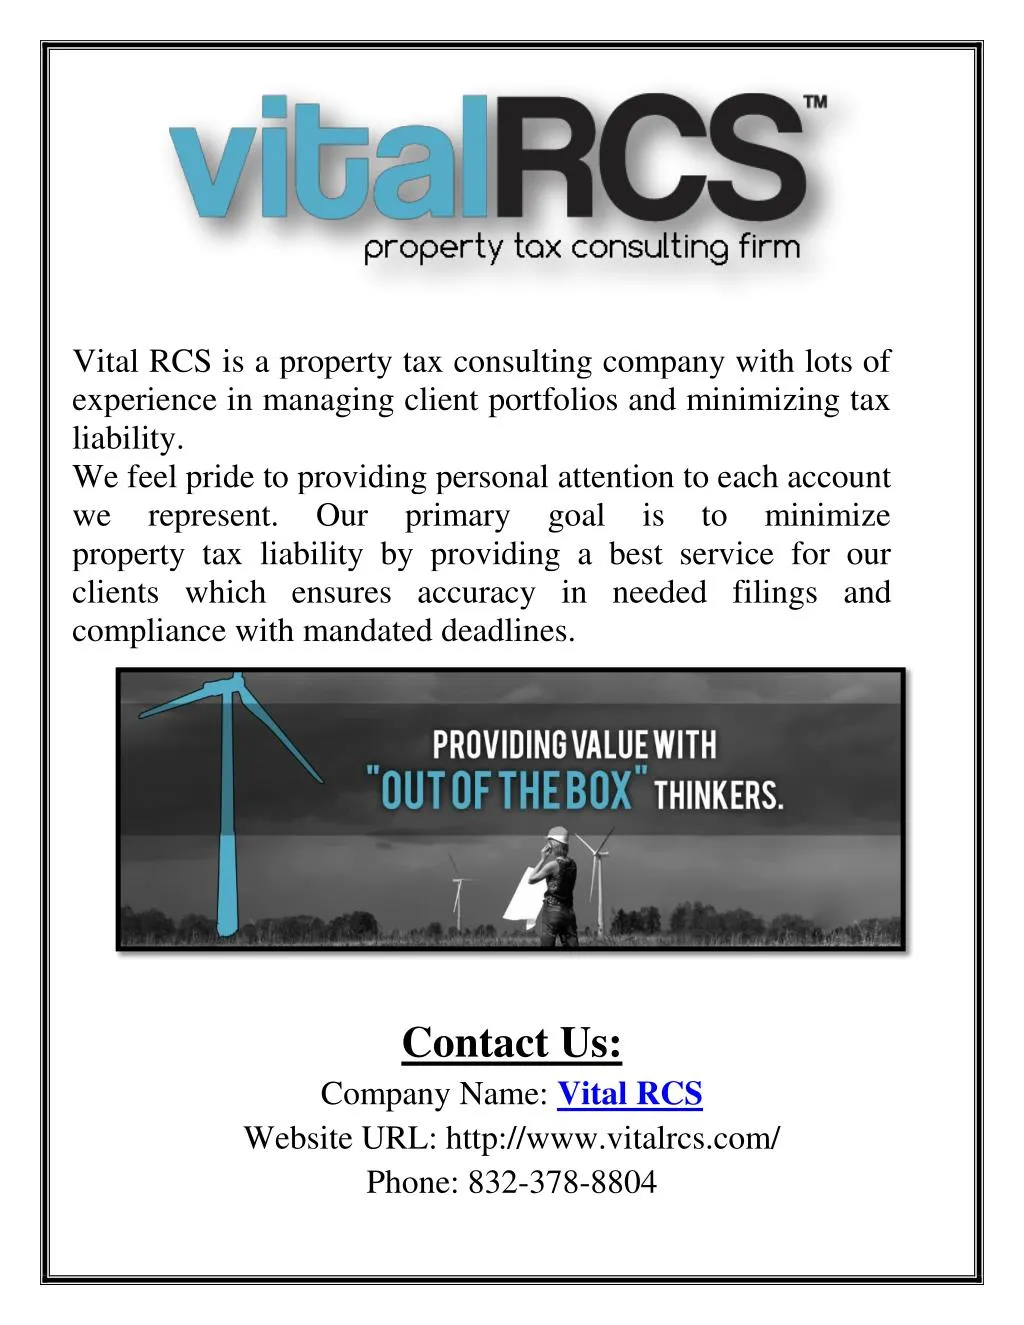 vital rcs is a property tax consulting company